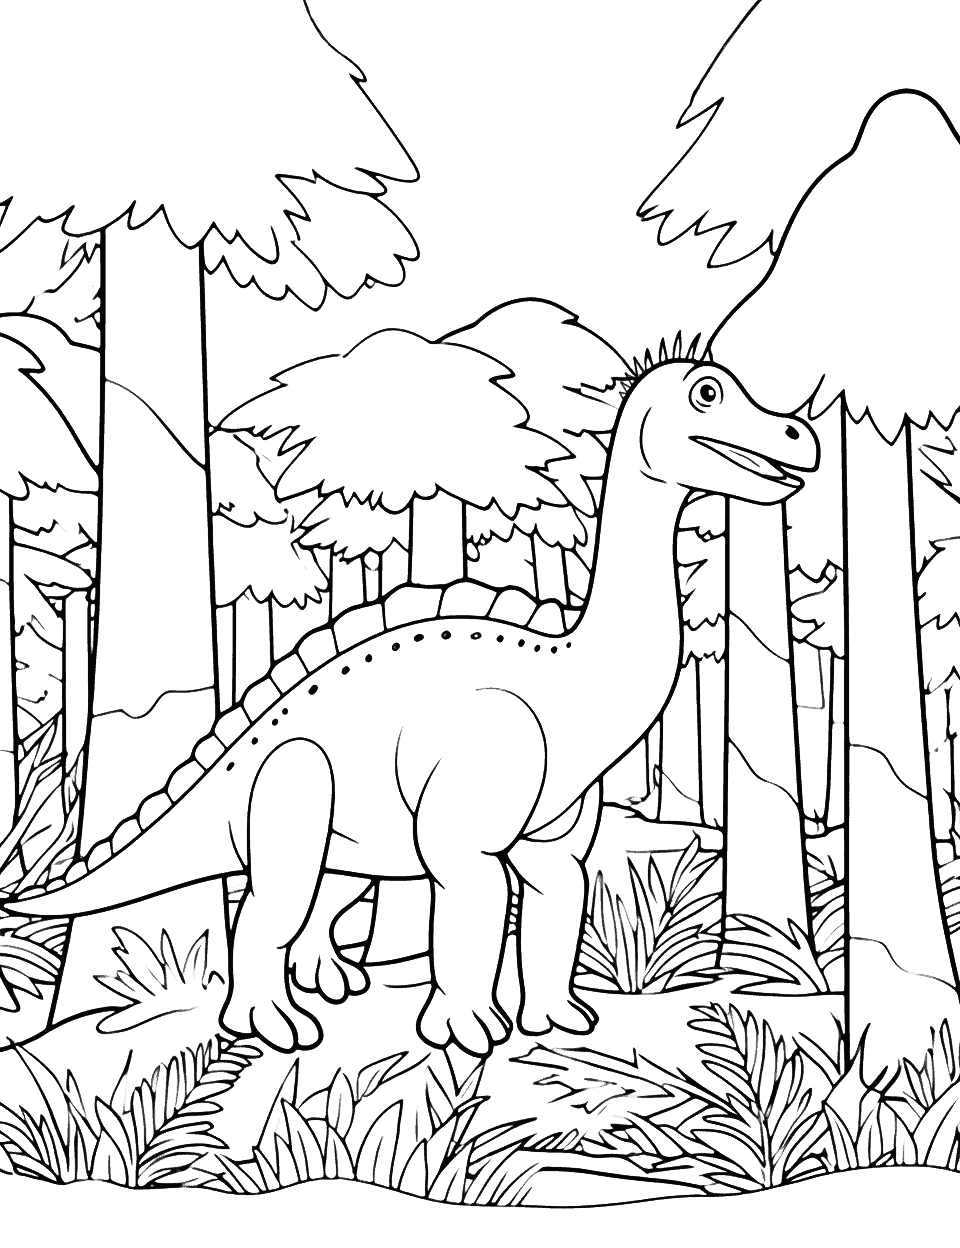 Parasaurolophus in the Forest Coloring Page - A Parasaurolophus calling to its herd in a dense forest.